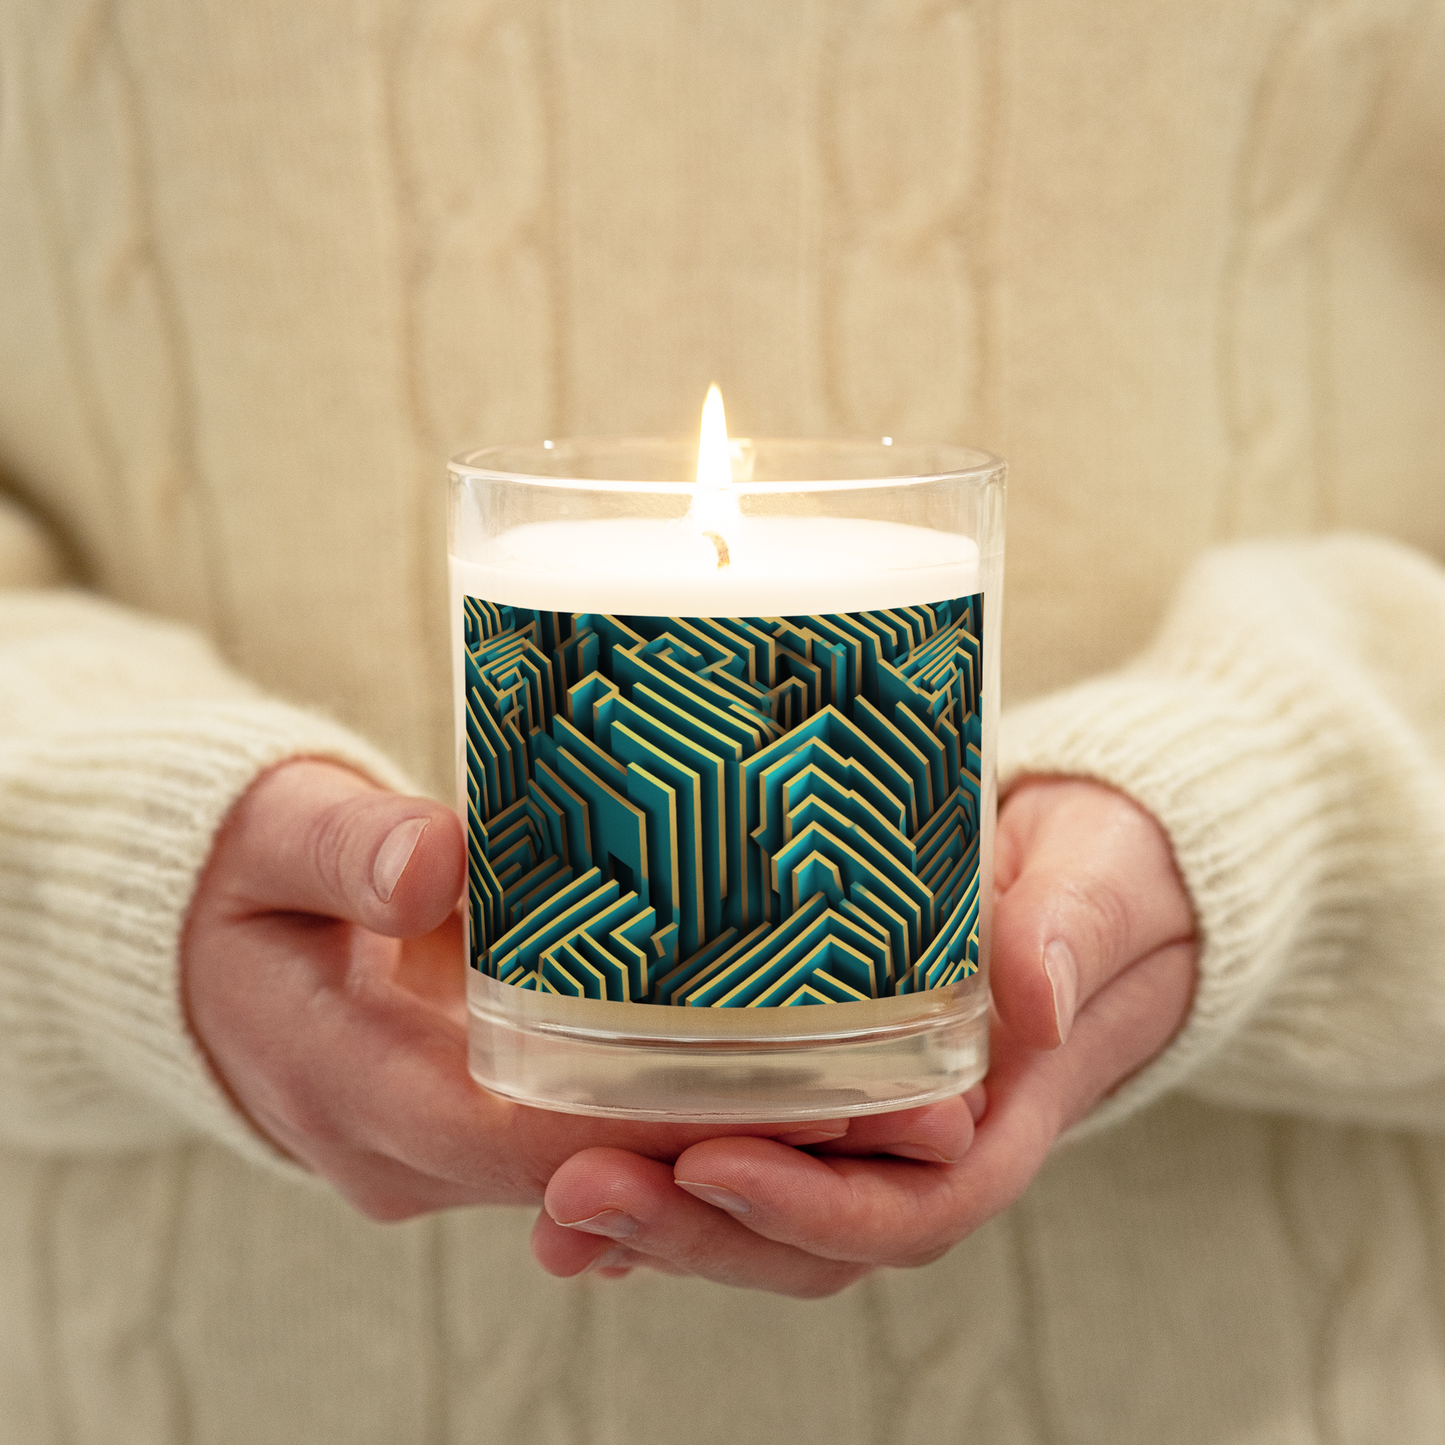 3D Maze Illusion | 3D Patterns | Glass Jar Soy Wax Candle - #5